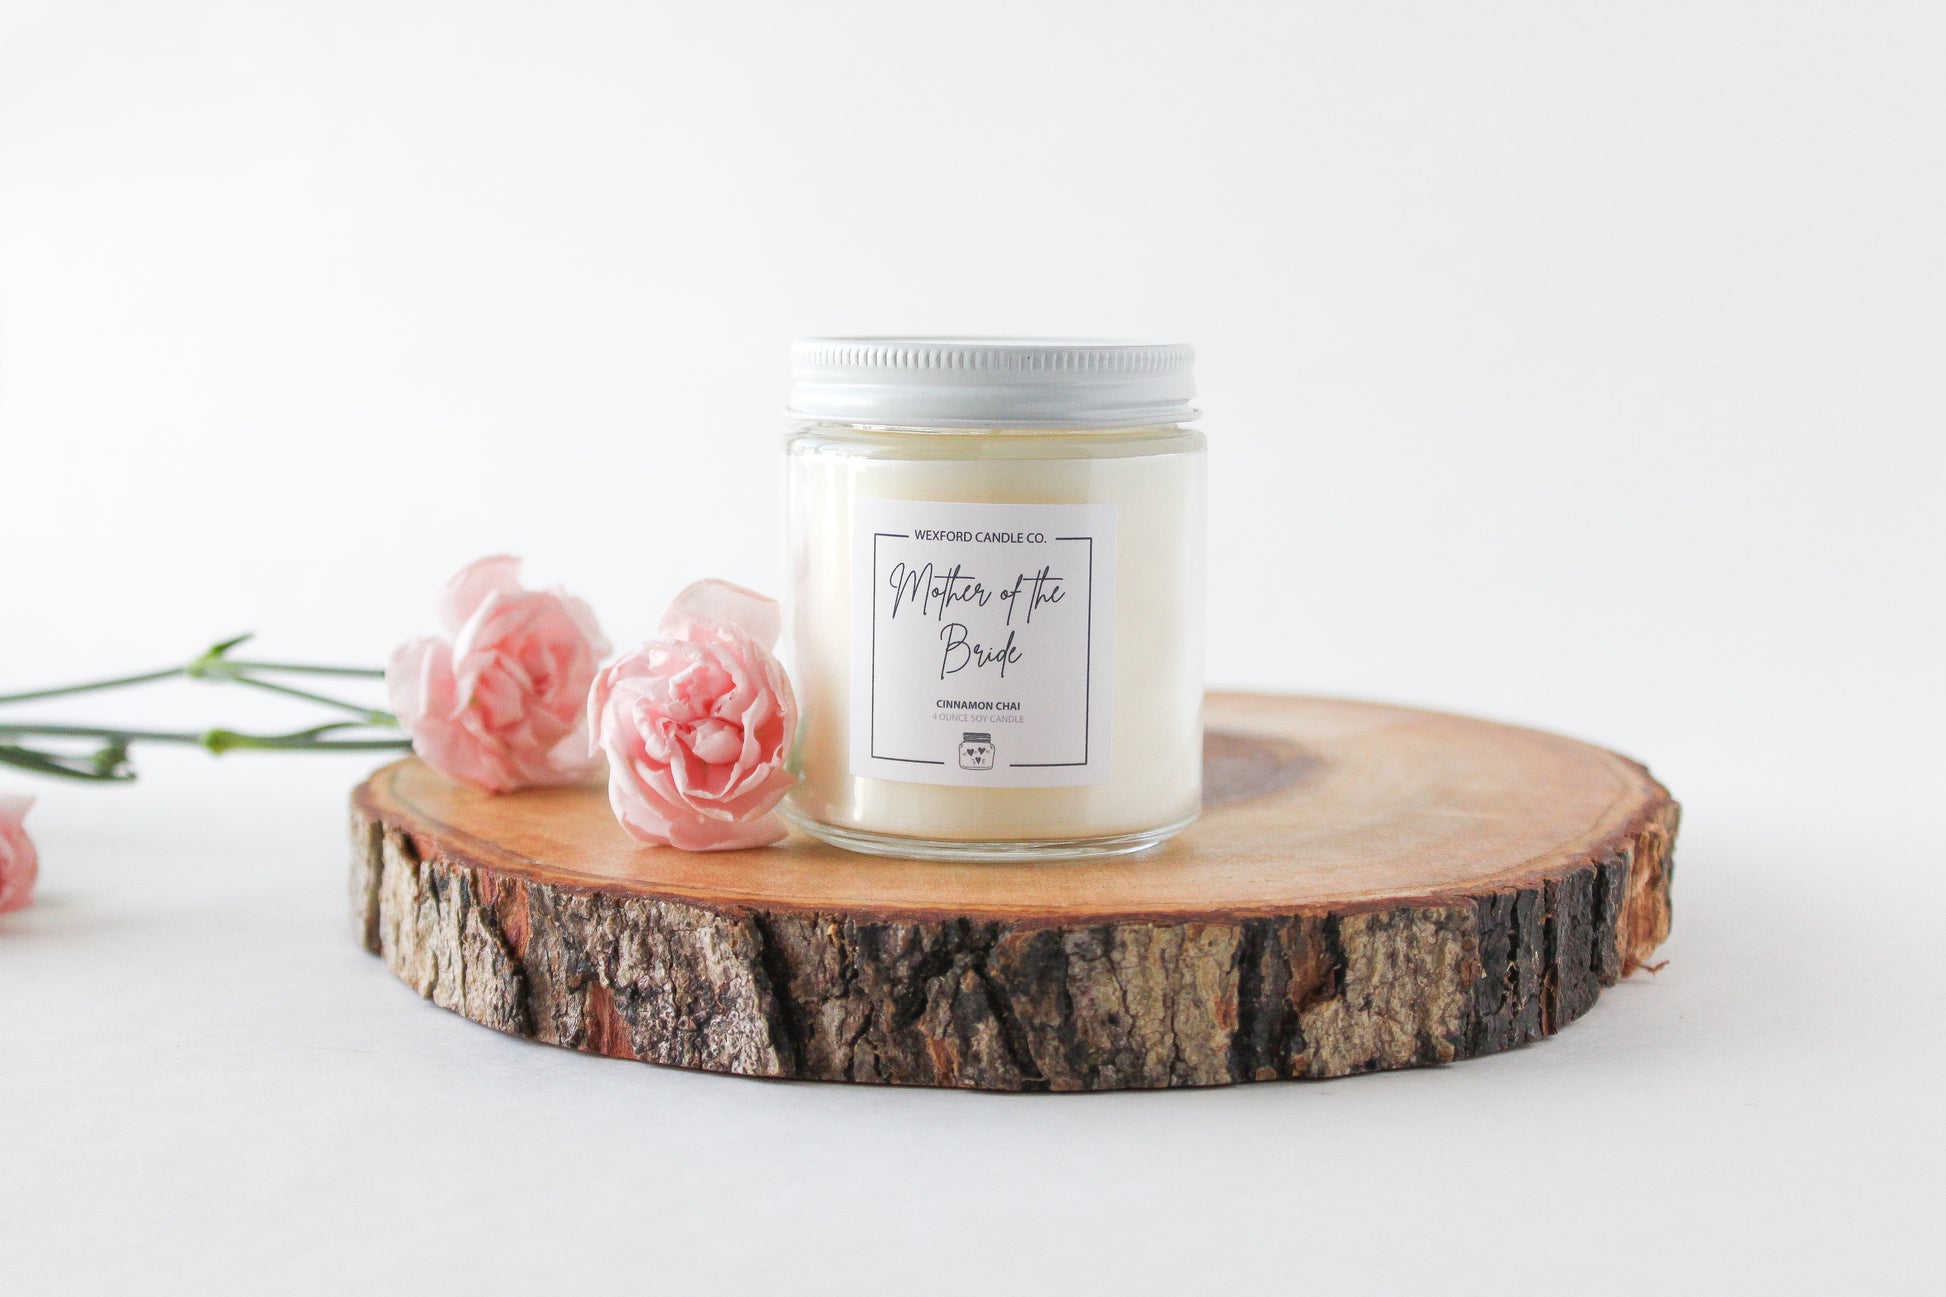 Mother of the Bride Soy Candle - Wexford Candle Co.